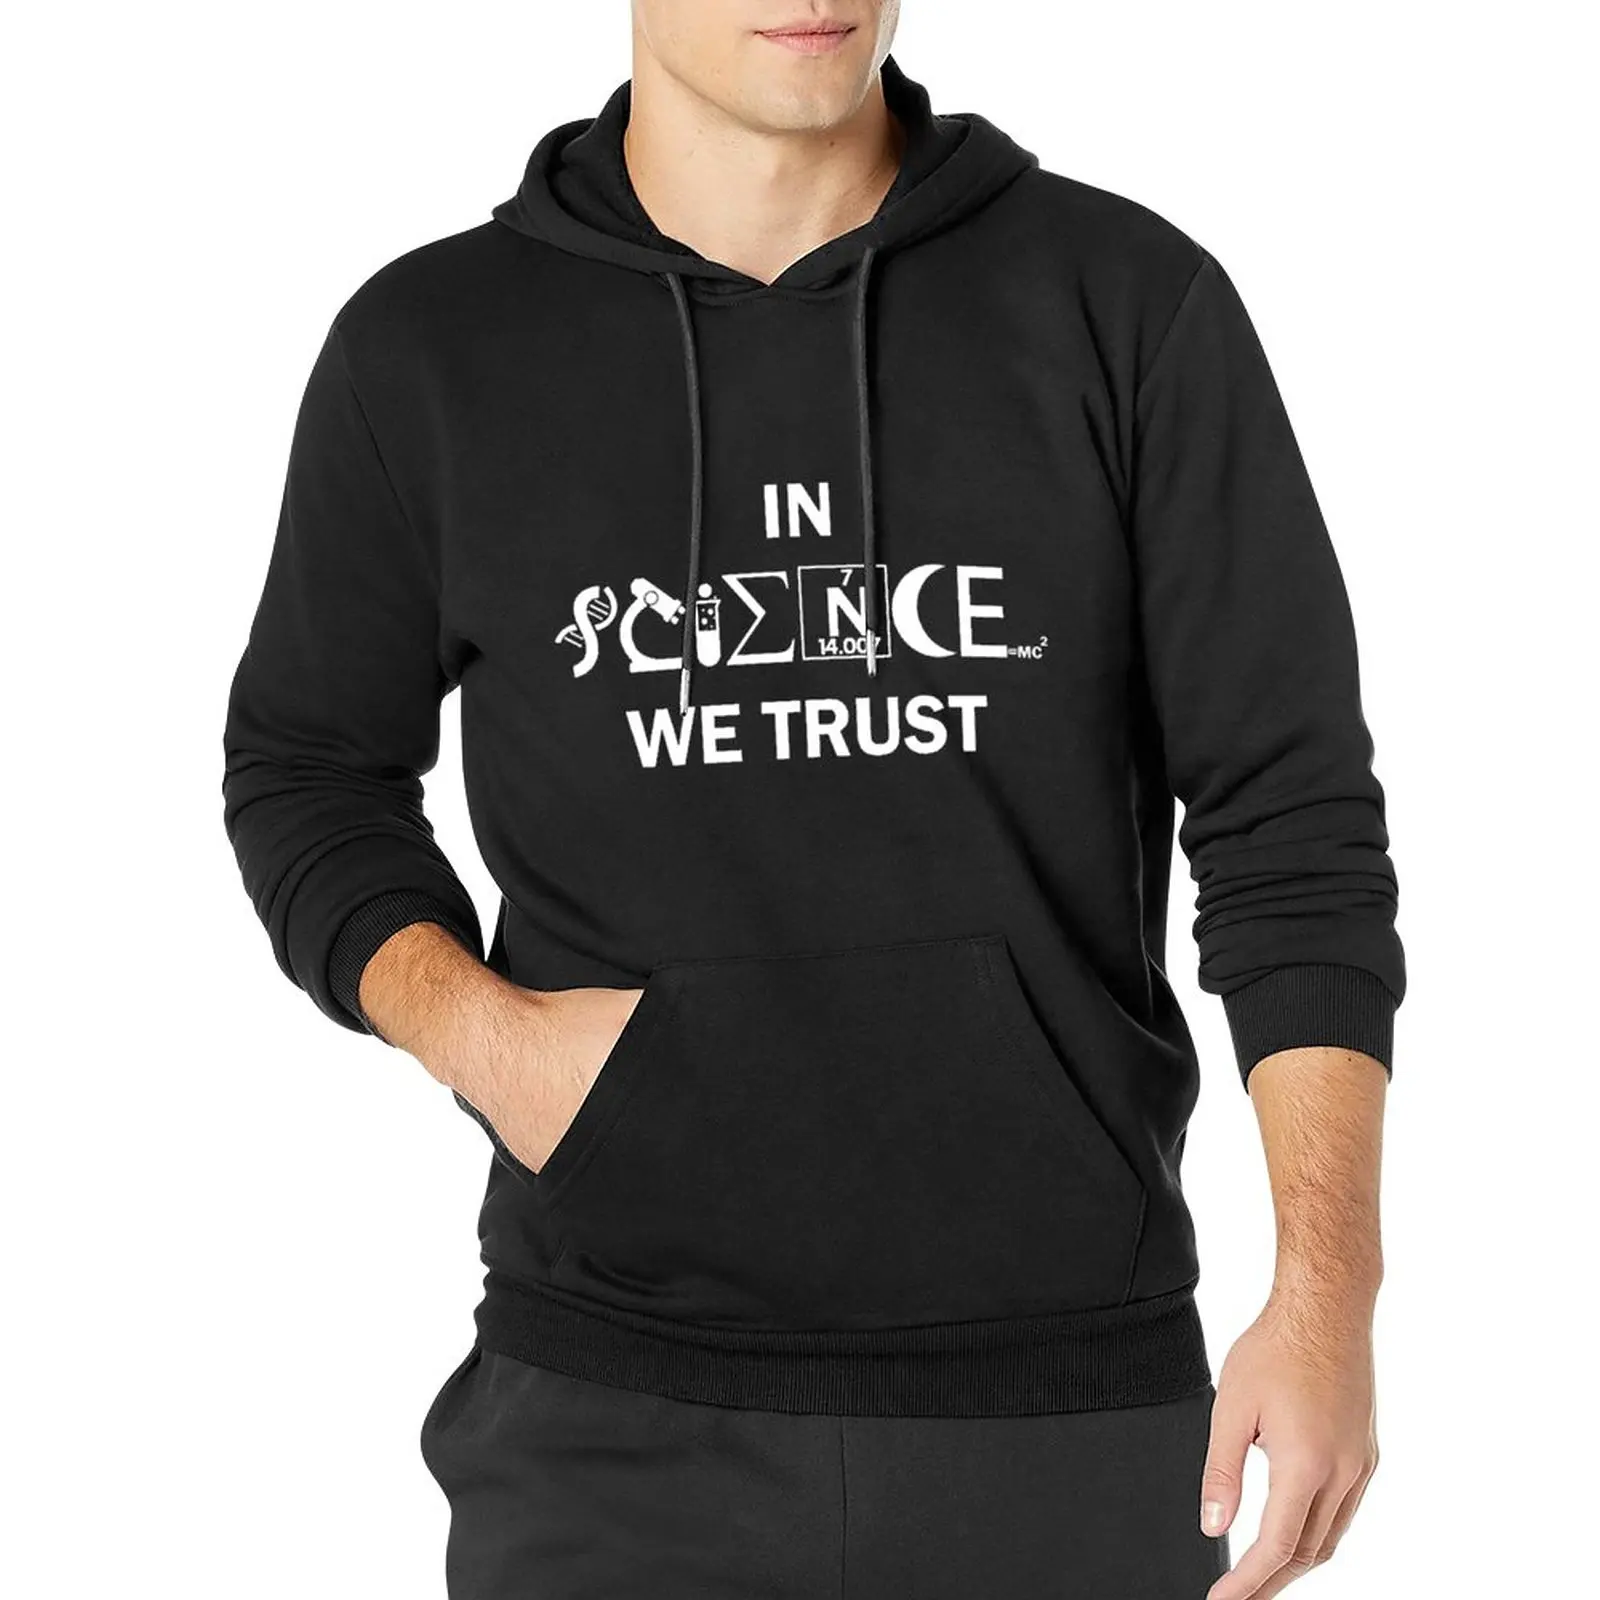 

In Science We Trust Casual Hoodies Motivating Human Progress Funny Hooded Sweatshirts Autumn Outerwear Oversize Pullover Hoodie